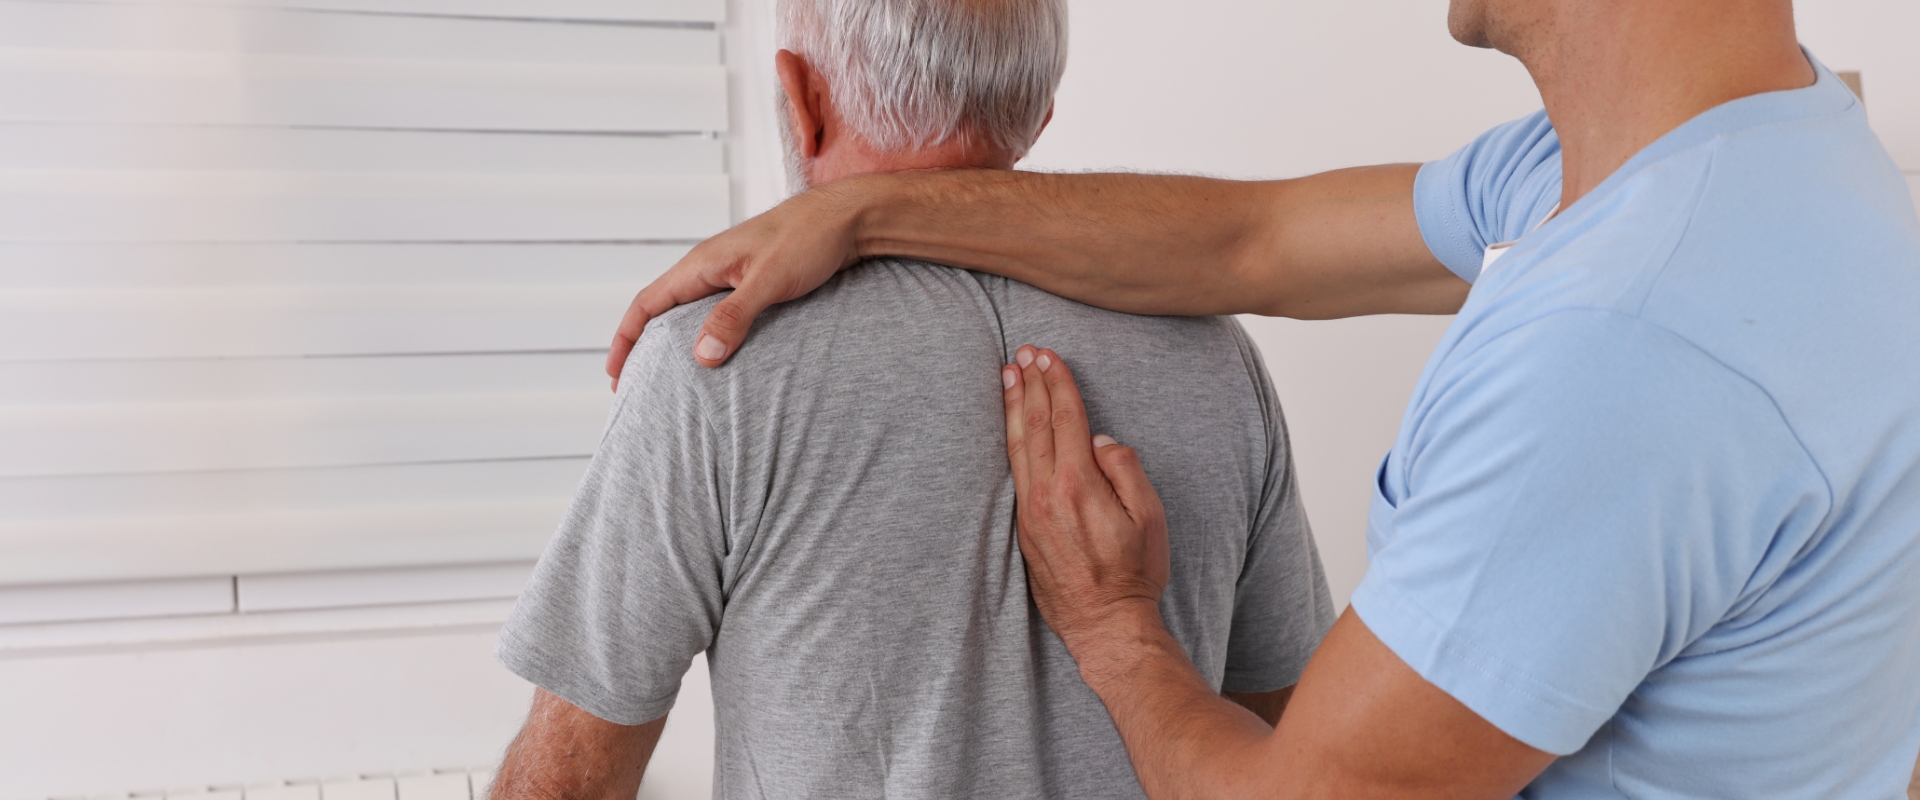 Grasmere-physical-therapy-spinal-manipulation-slider-staten-island-new-york-ny